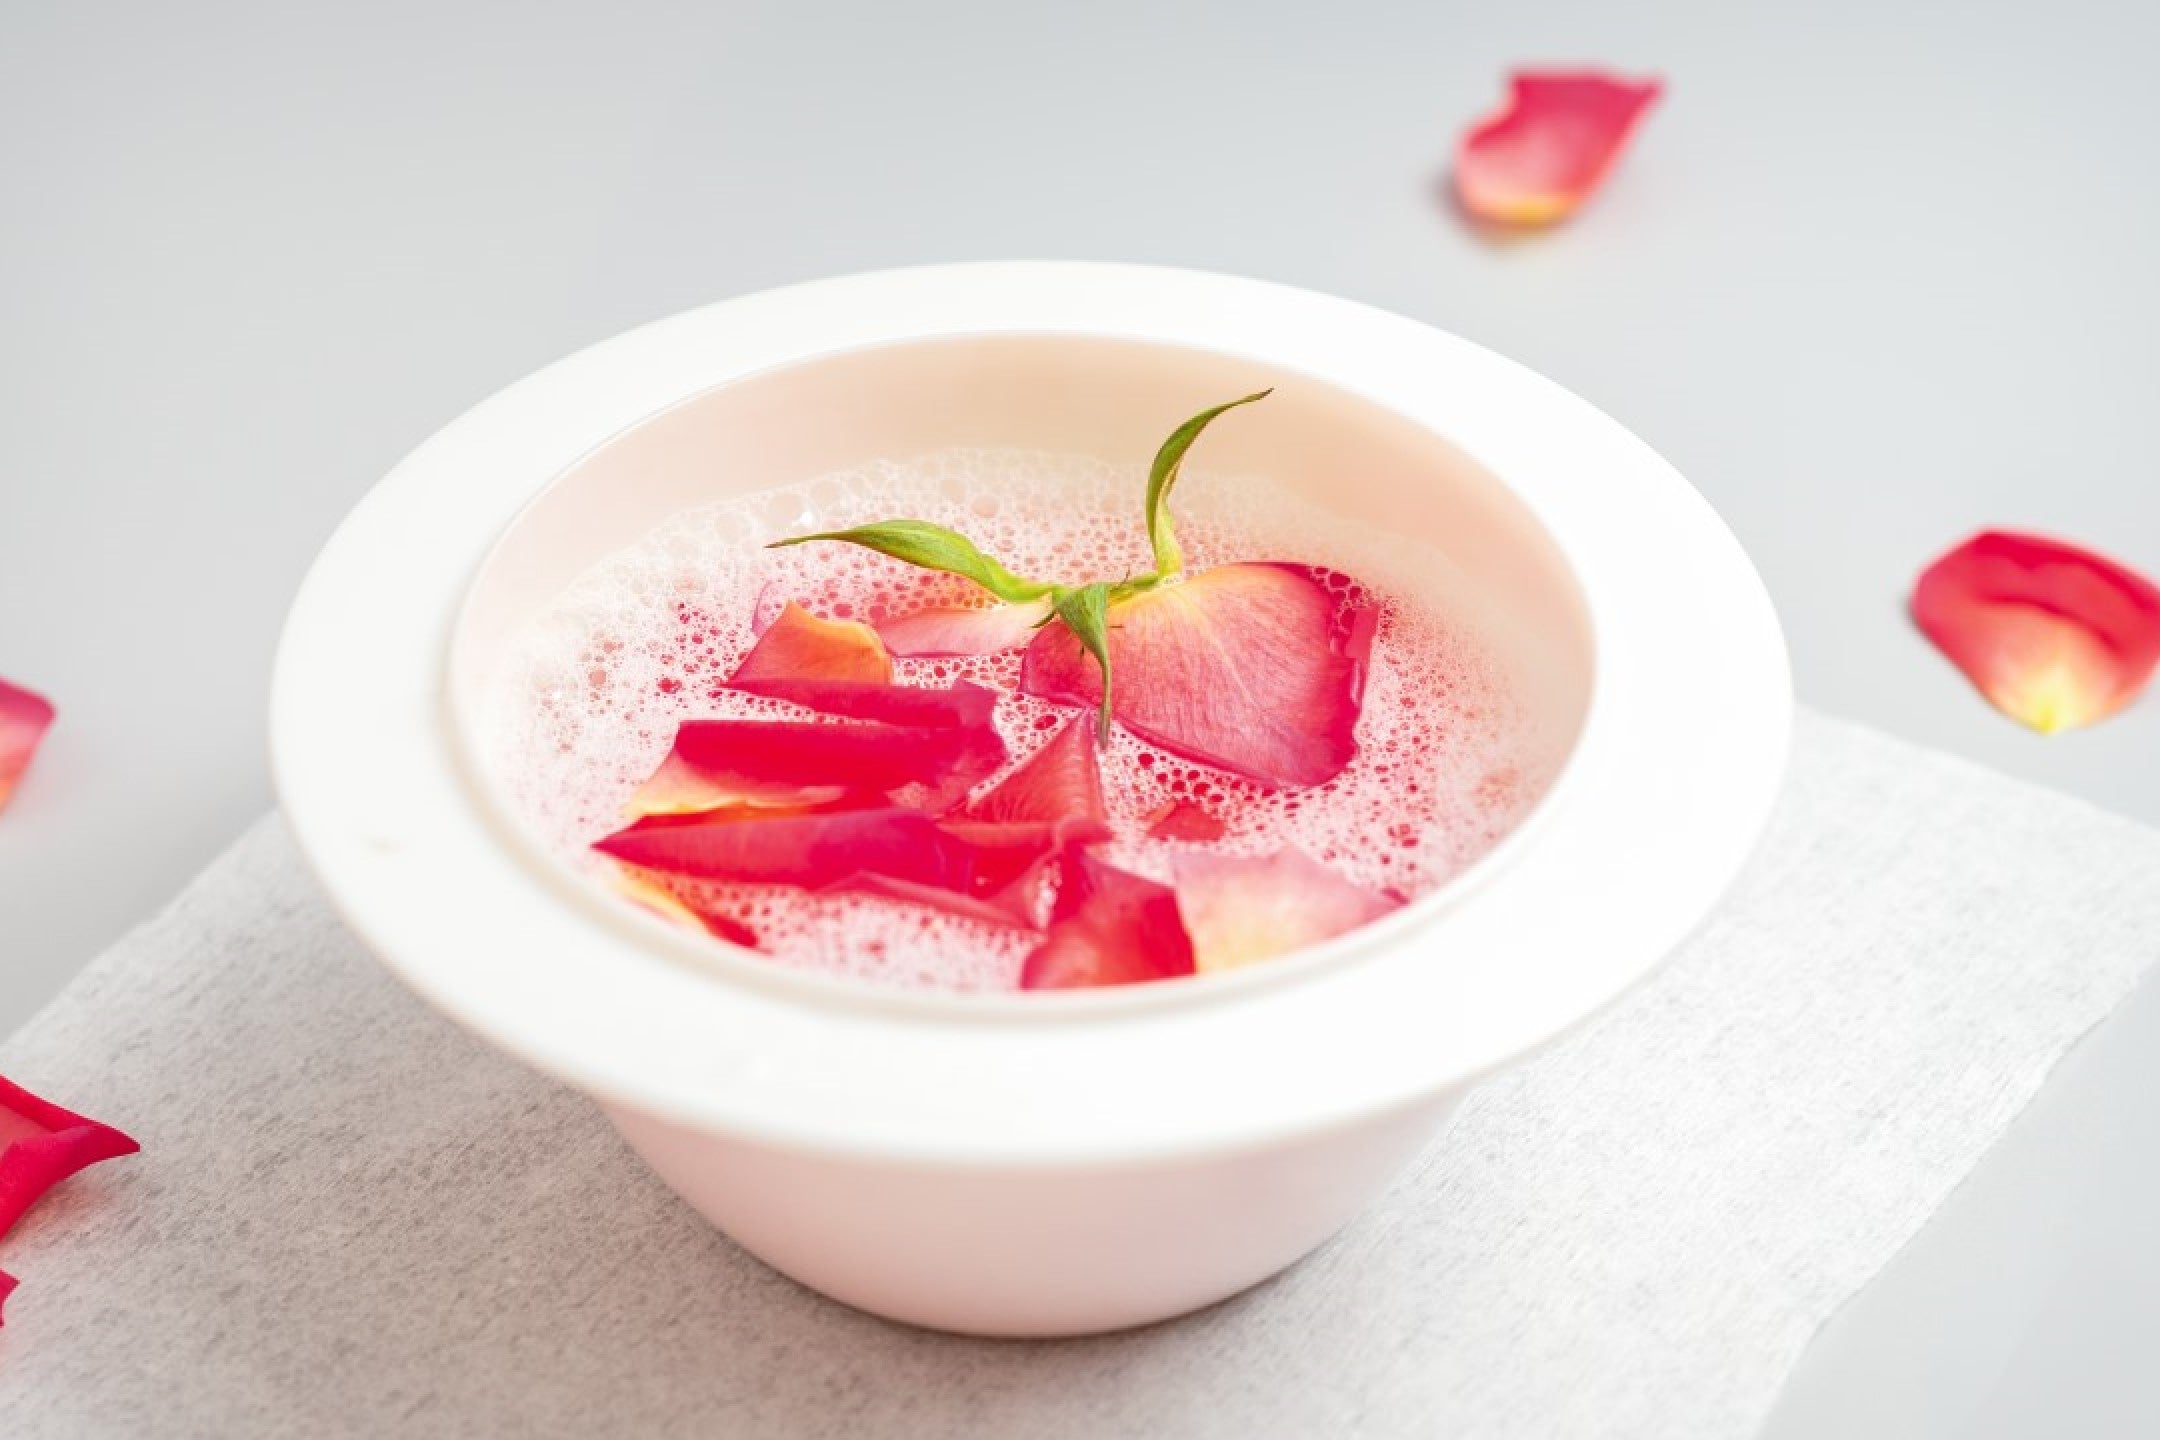 Rose petals in water, a preparation for alum and rose water for hair removal.